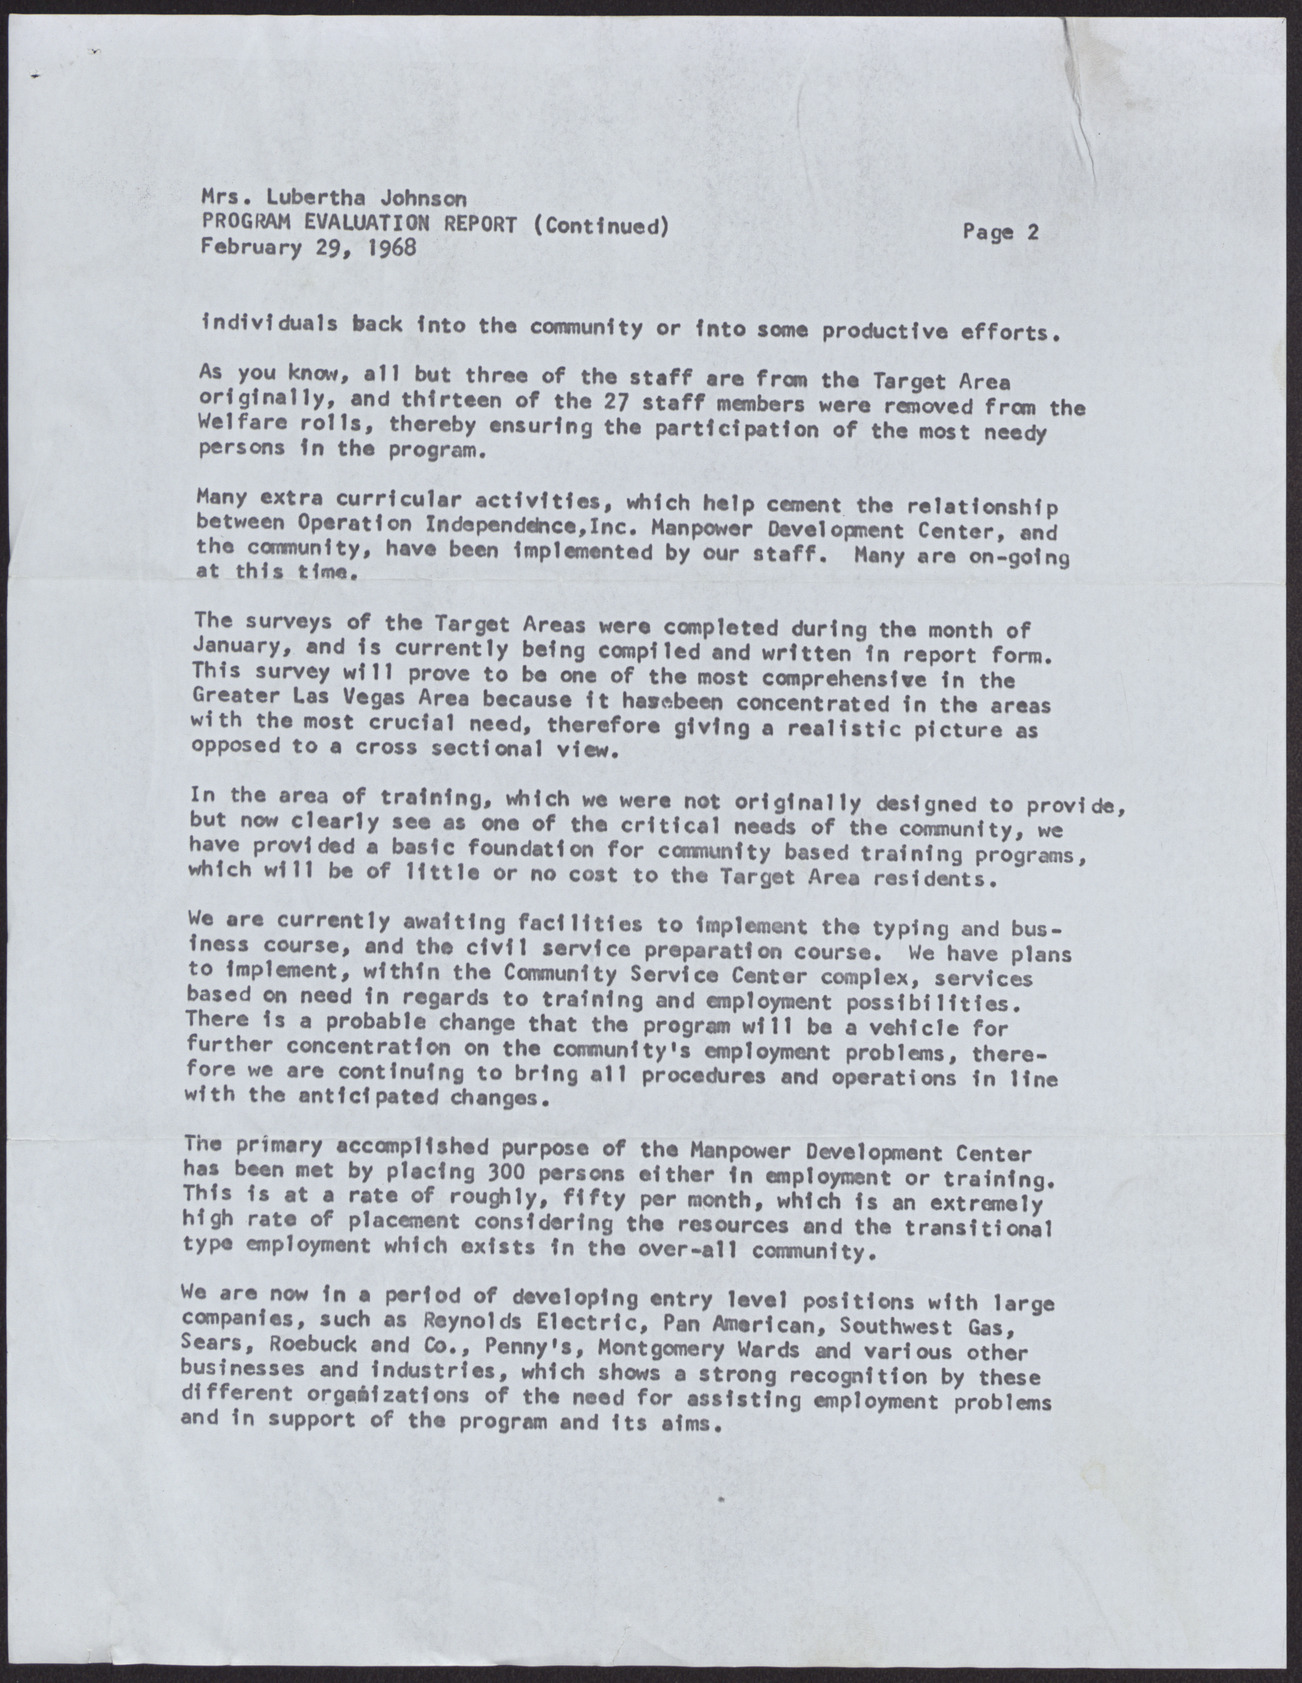 Letter to Mrs. Lubertha Johnson from George W. Gant (3 pages), February 29, 1968, page 2